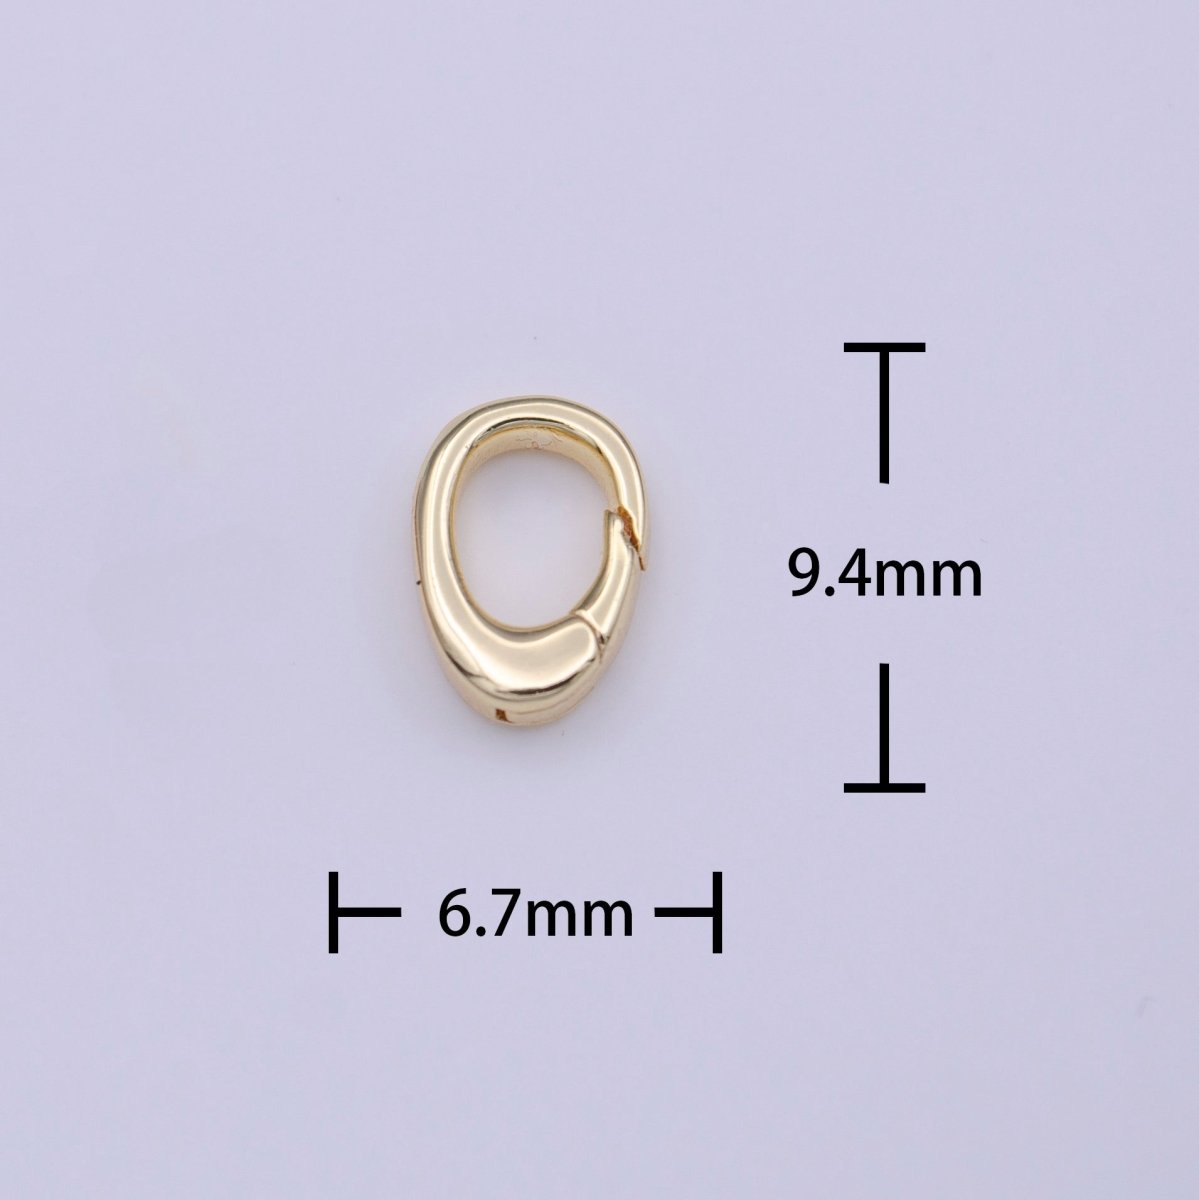 Tiny Gold Spring Gate Ring, Push Gate ring 6.7x9.4mm Tear Drop Ring Charm Holder Gold Clasp for Jewelry Clasp K-286 - DLUXCA